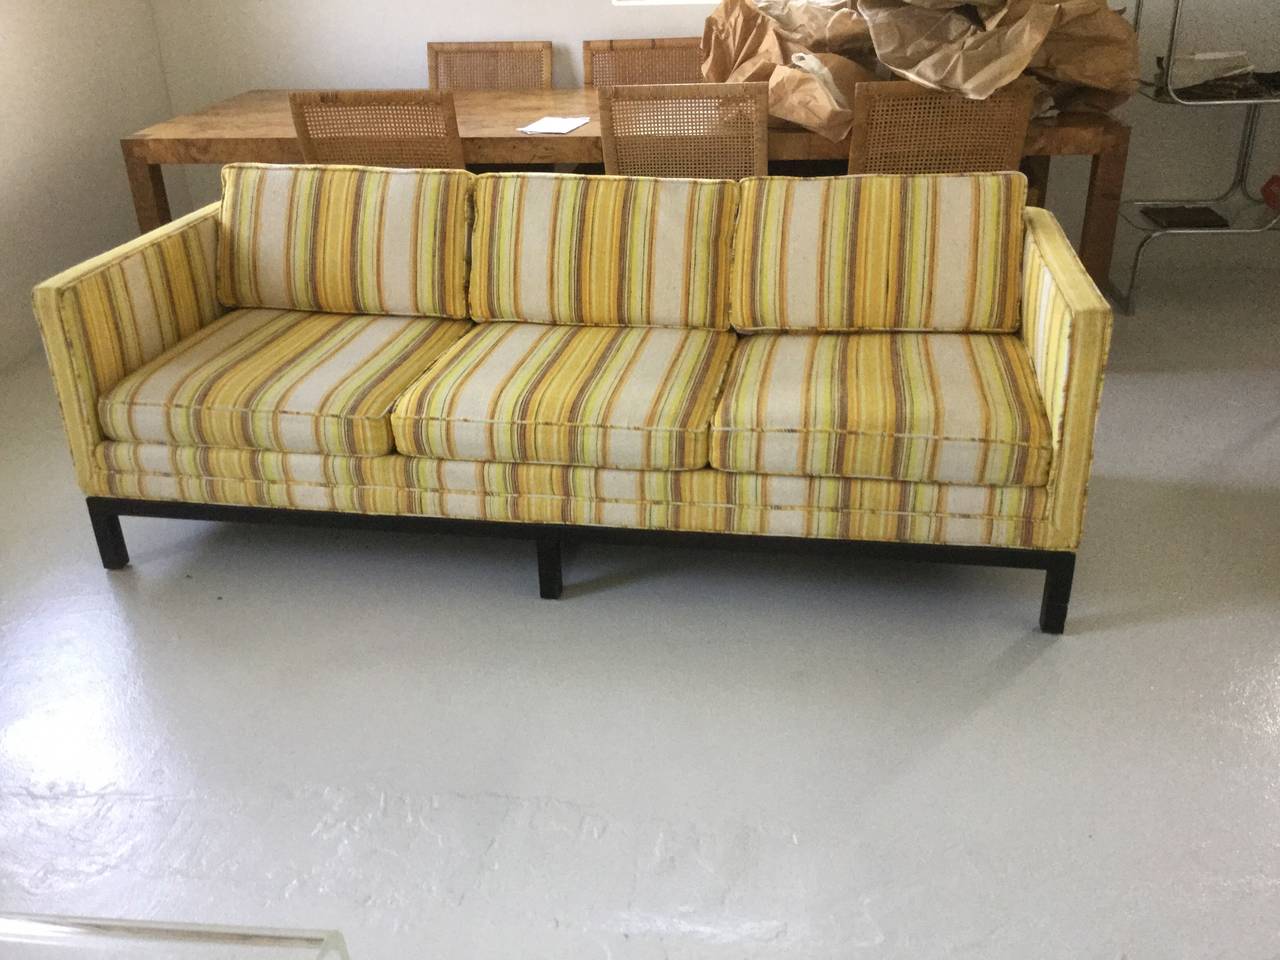 Nice Probber sofa with clean lines.